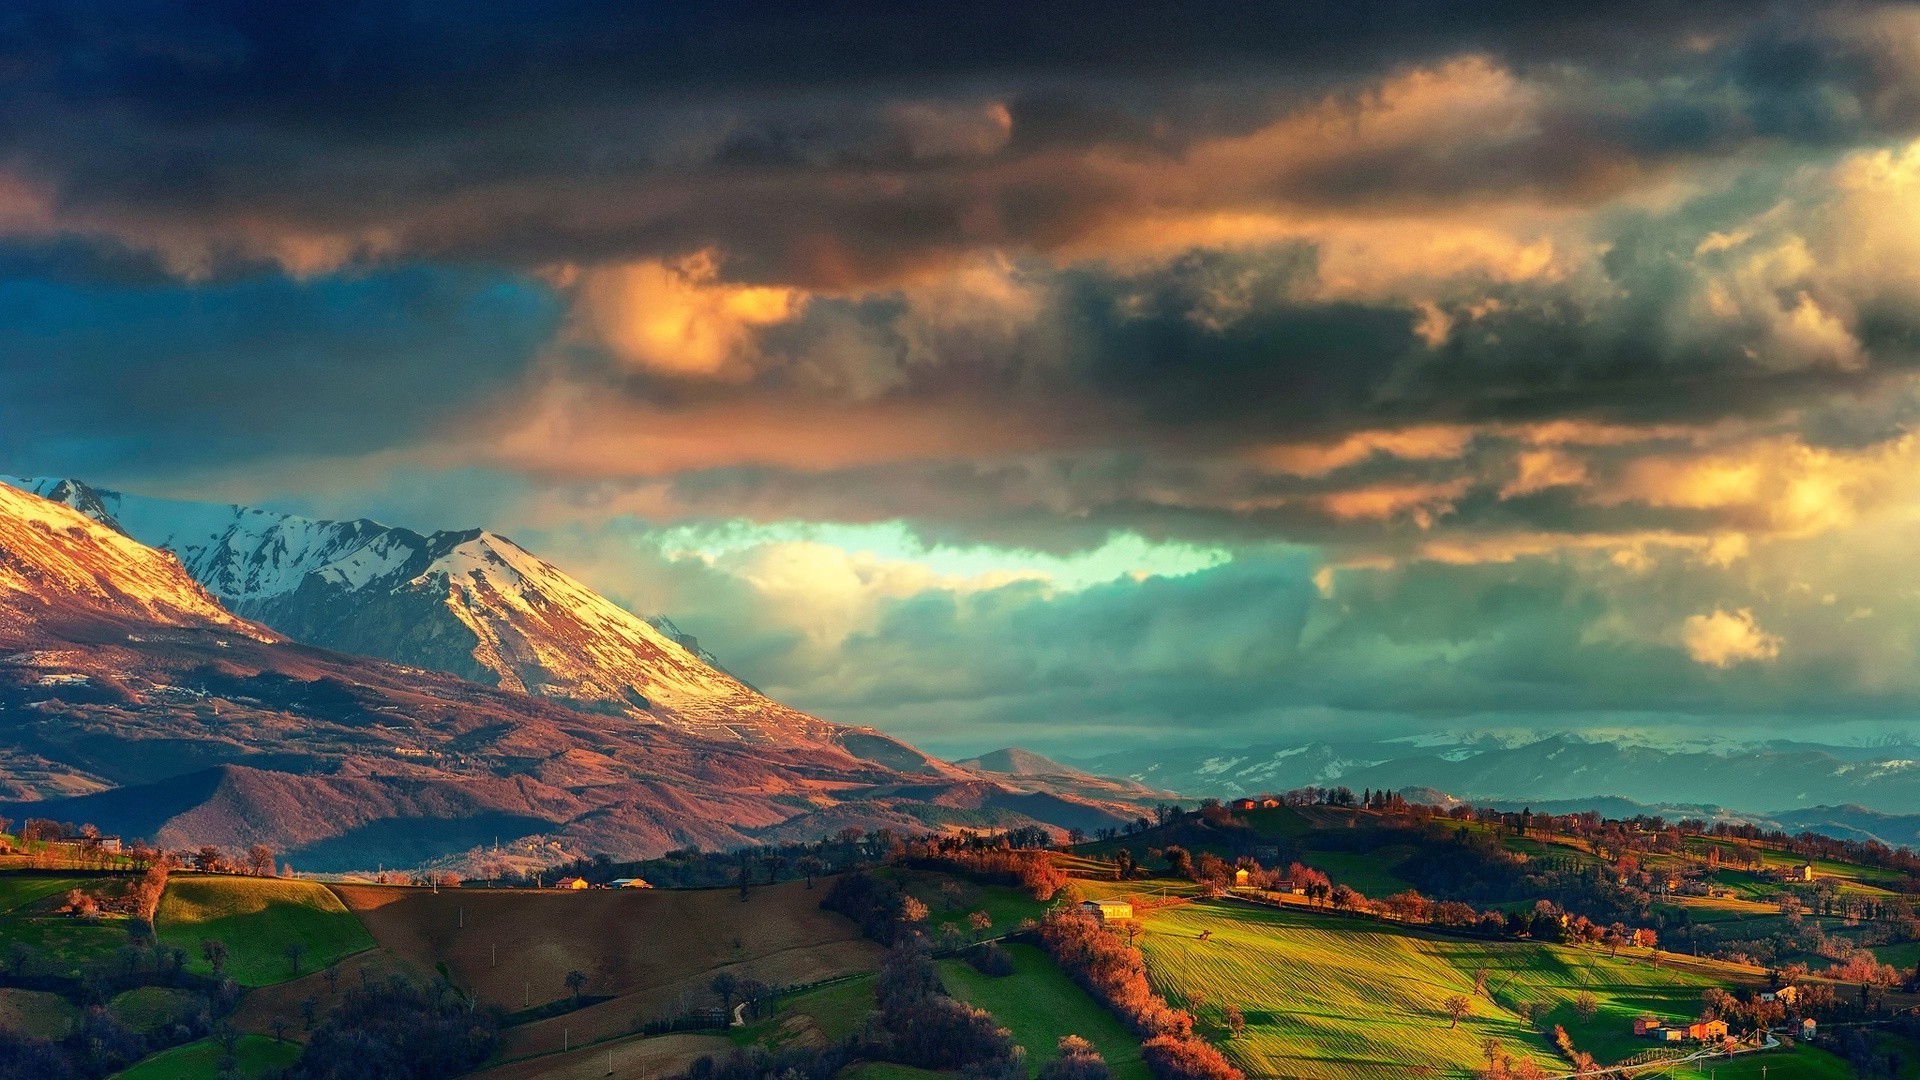 General 1920x1080 nature landscape mountains clouds Italy Alps hills trees fall sunset snowy peak field